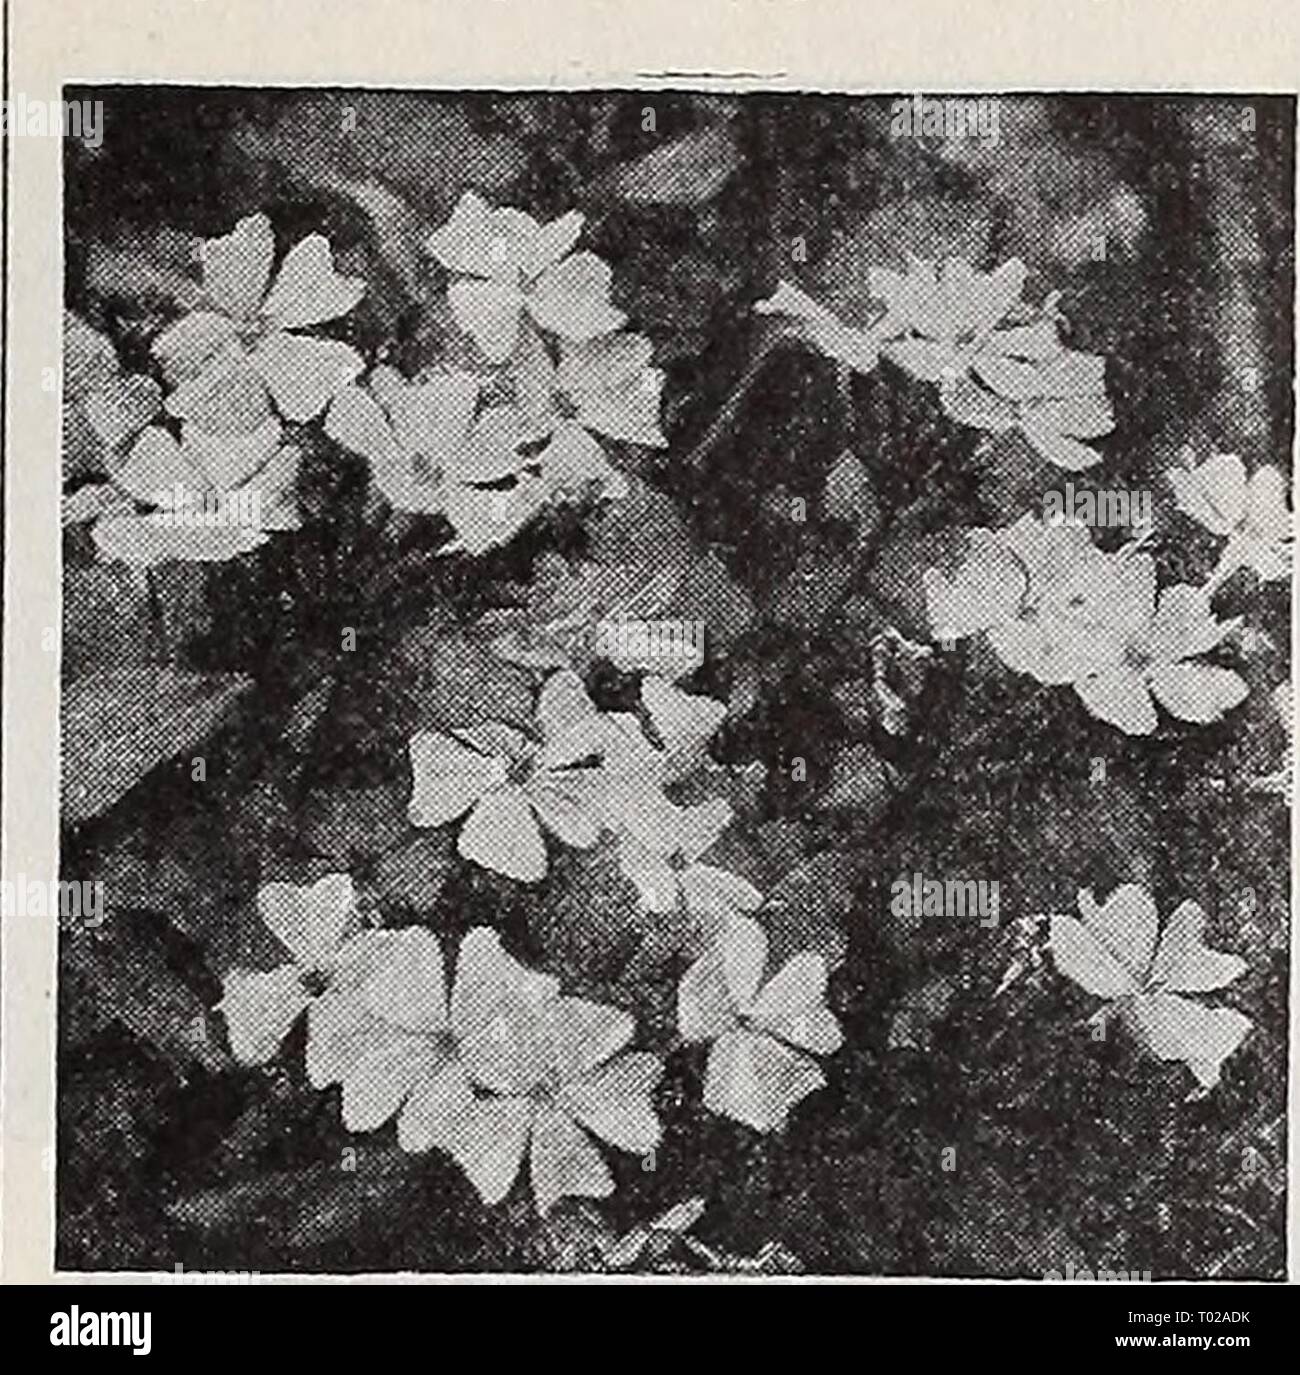 Dreer's garden book 1939 : 101 years of Dreer quality seeds plants bulbs . dreersgardenbook1939henr Year: 1939  Phlox nivalis sylvestris Nivalis sylvestris (Patent Pending). A true dwarf Phlox of the same habit as Phlox subulata. Has dense moss green foliage covered completely with large rosy red flowers the size of a half dollar. Of strong growth, blooming in early spring. 40c each; 3 for $1.15; 12 for $4.00. Phlox divaricata Canadensis. A Â® 10 in. Large fragrant lavender flowers borne in the greatest profusion during April and May. Splendid for semi-shaded positions. 30c each; 3 for 85c; 12 Stock Photo